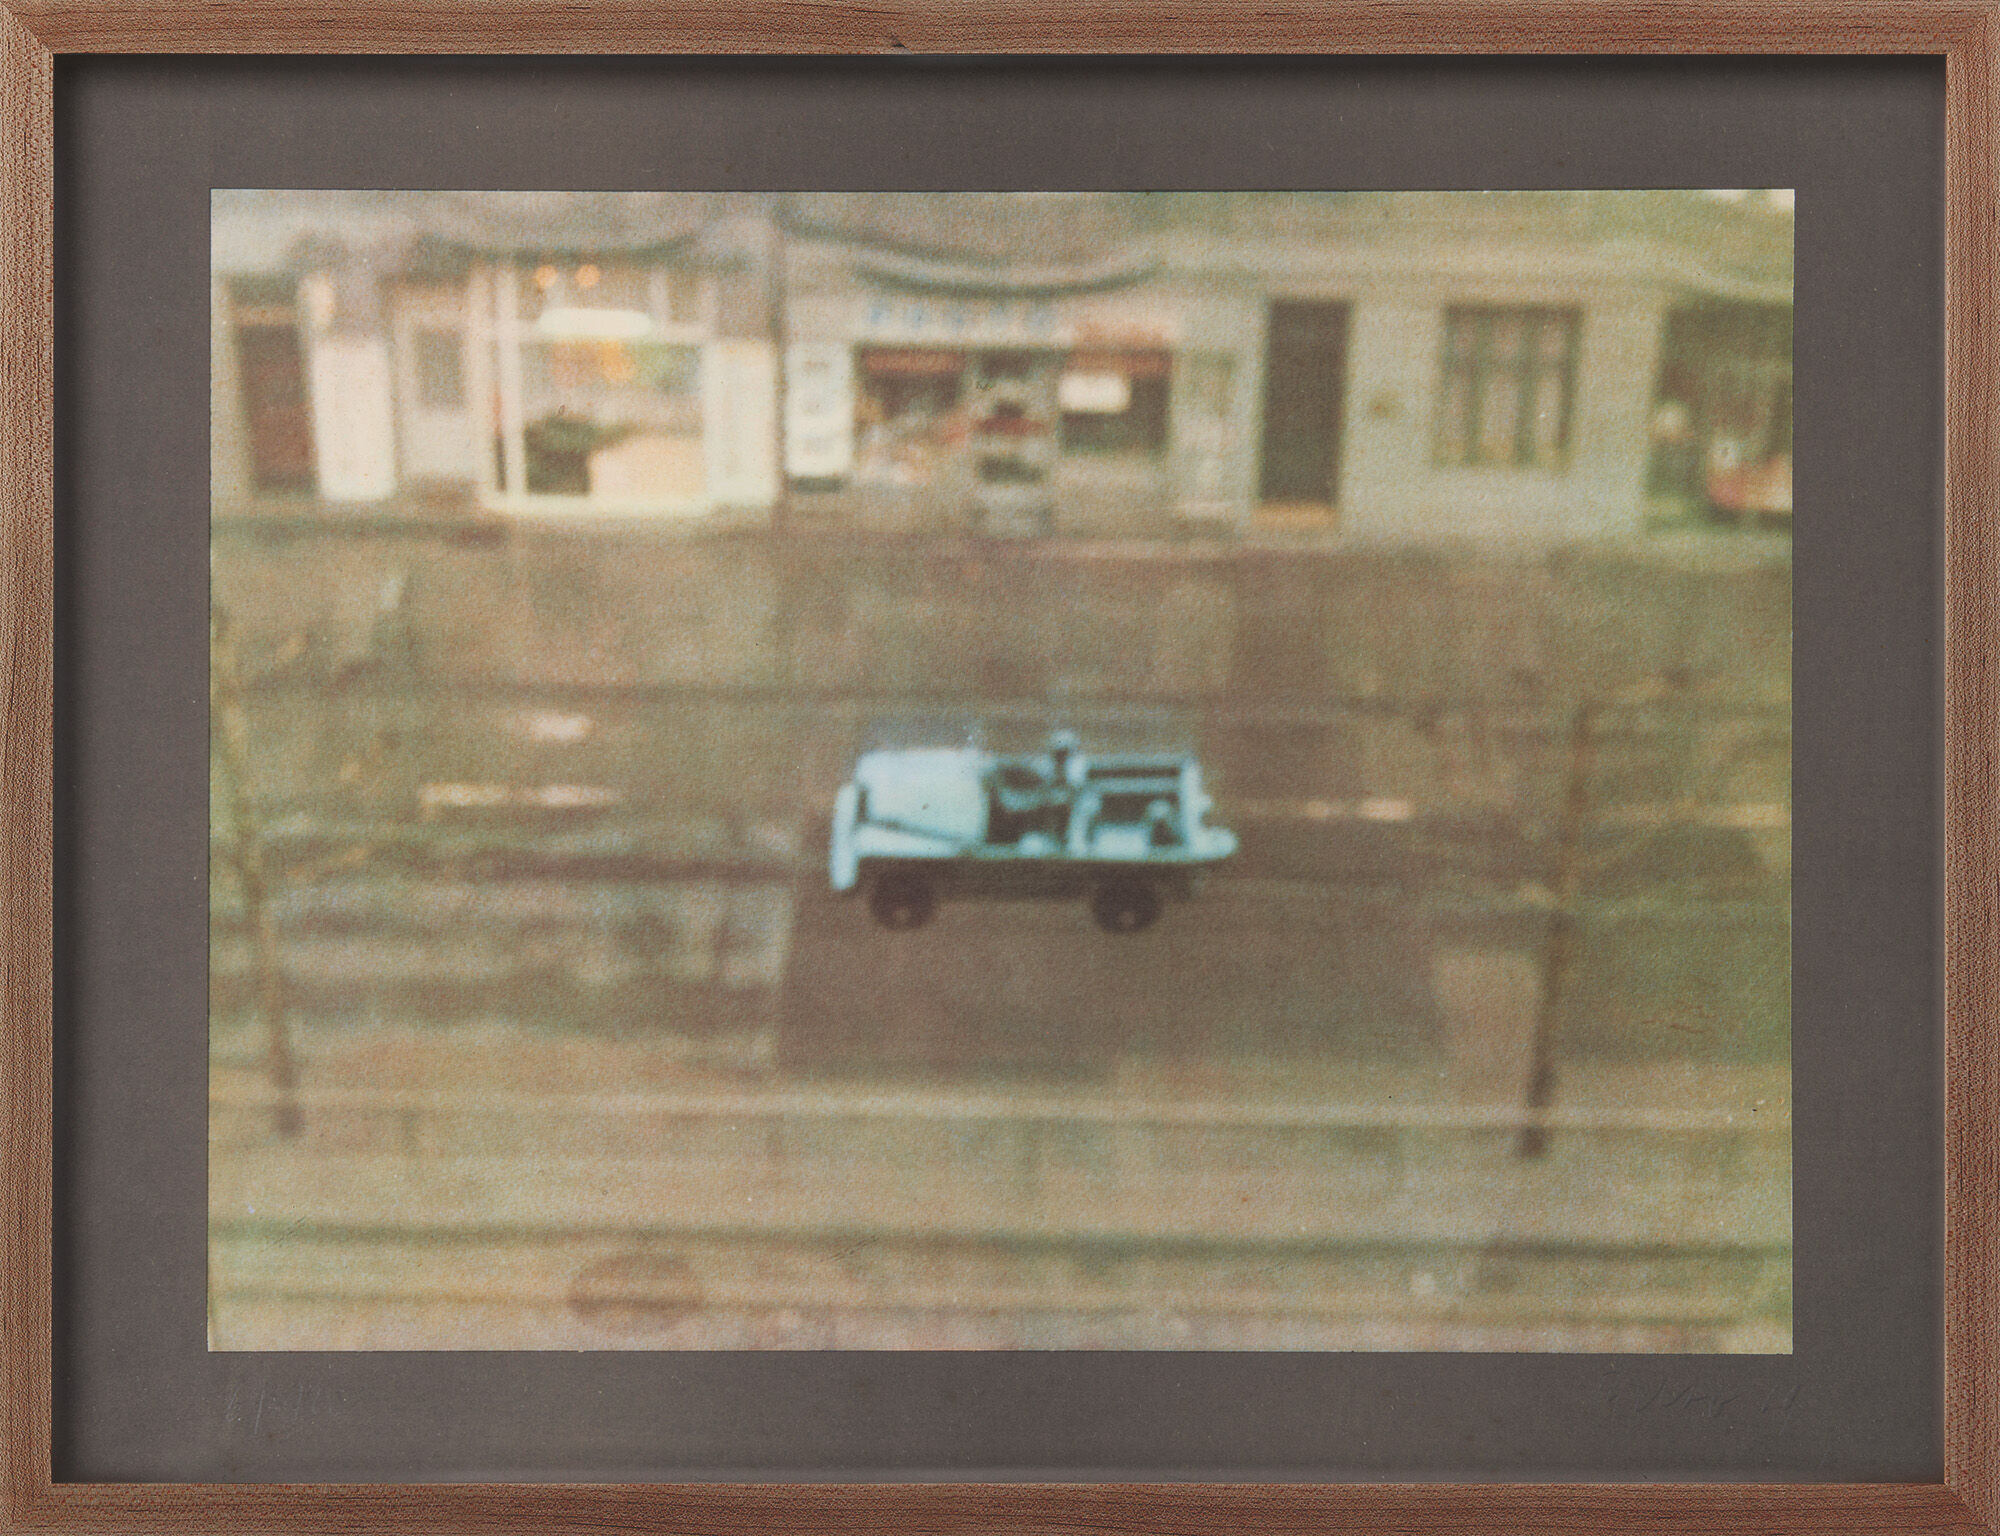 Picture "Car" (1969) by Gerhard Richter